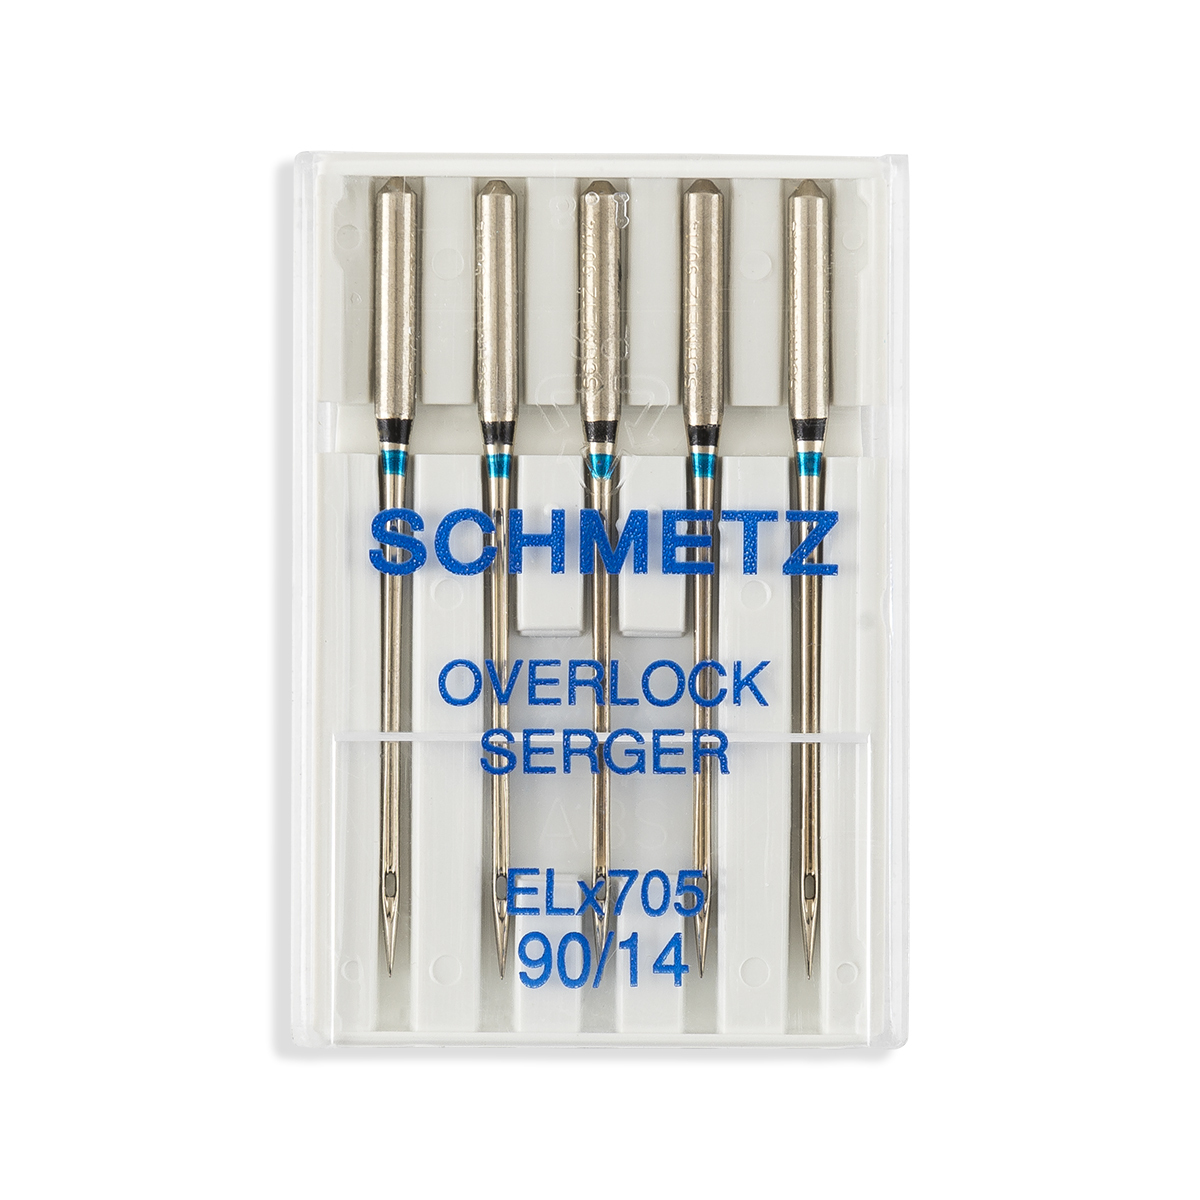 Straight Serger Sewing Machine Needles Ball Point/Size 16/100, Rowley